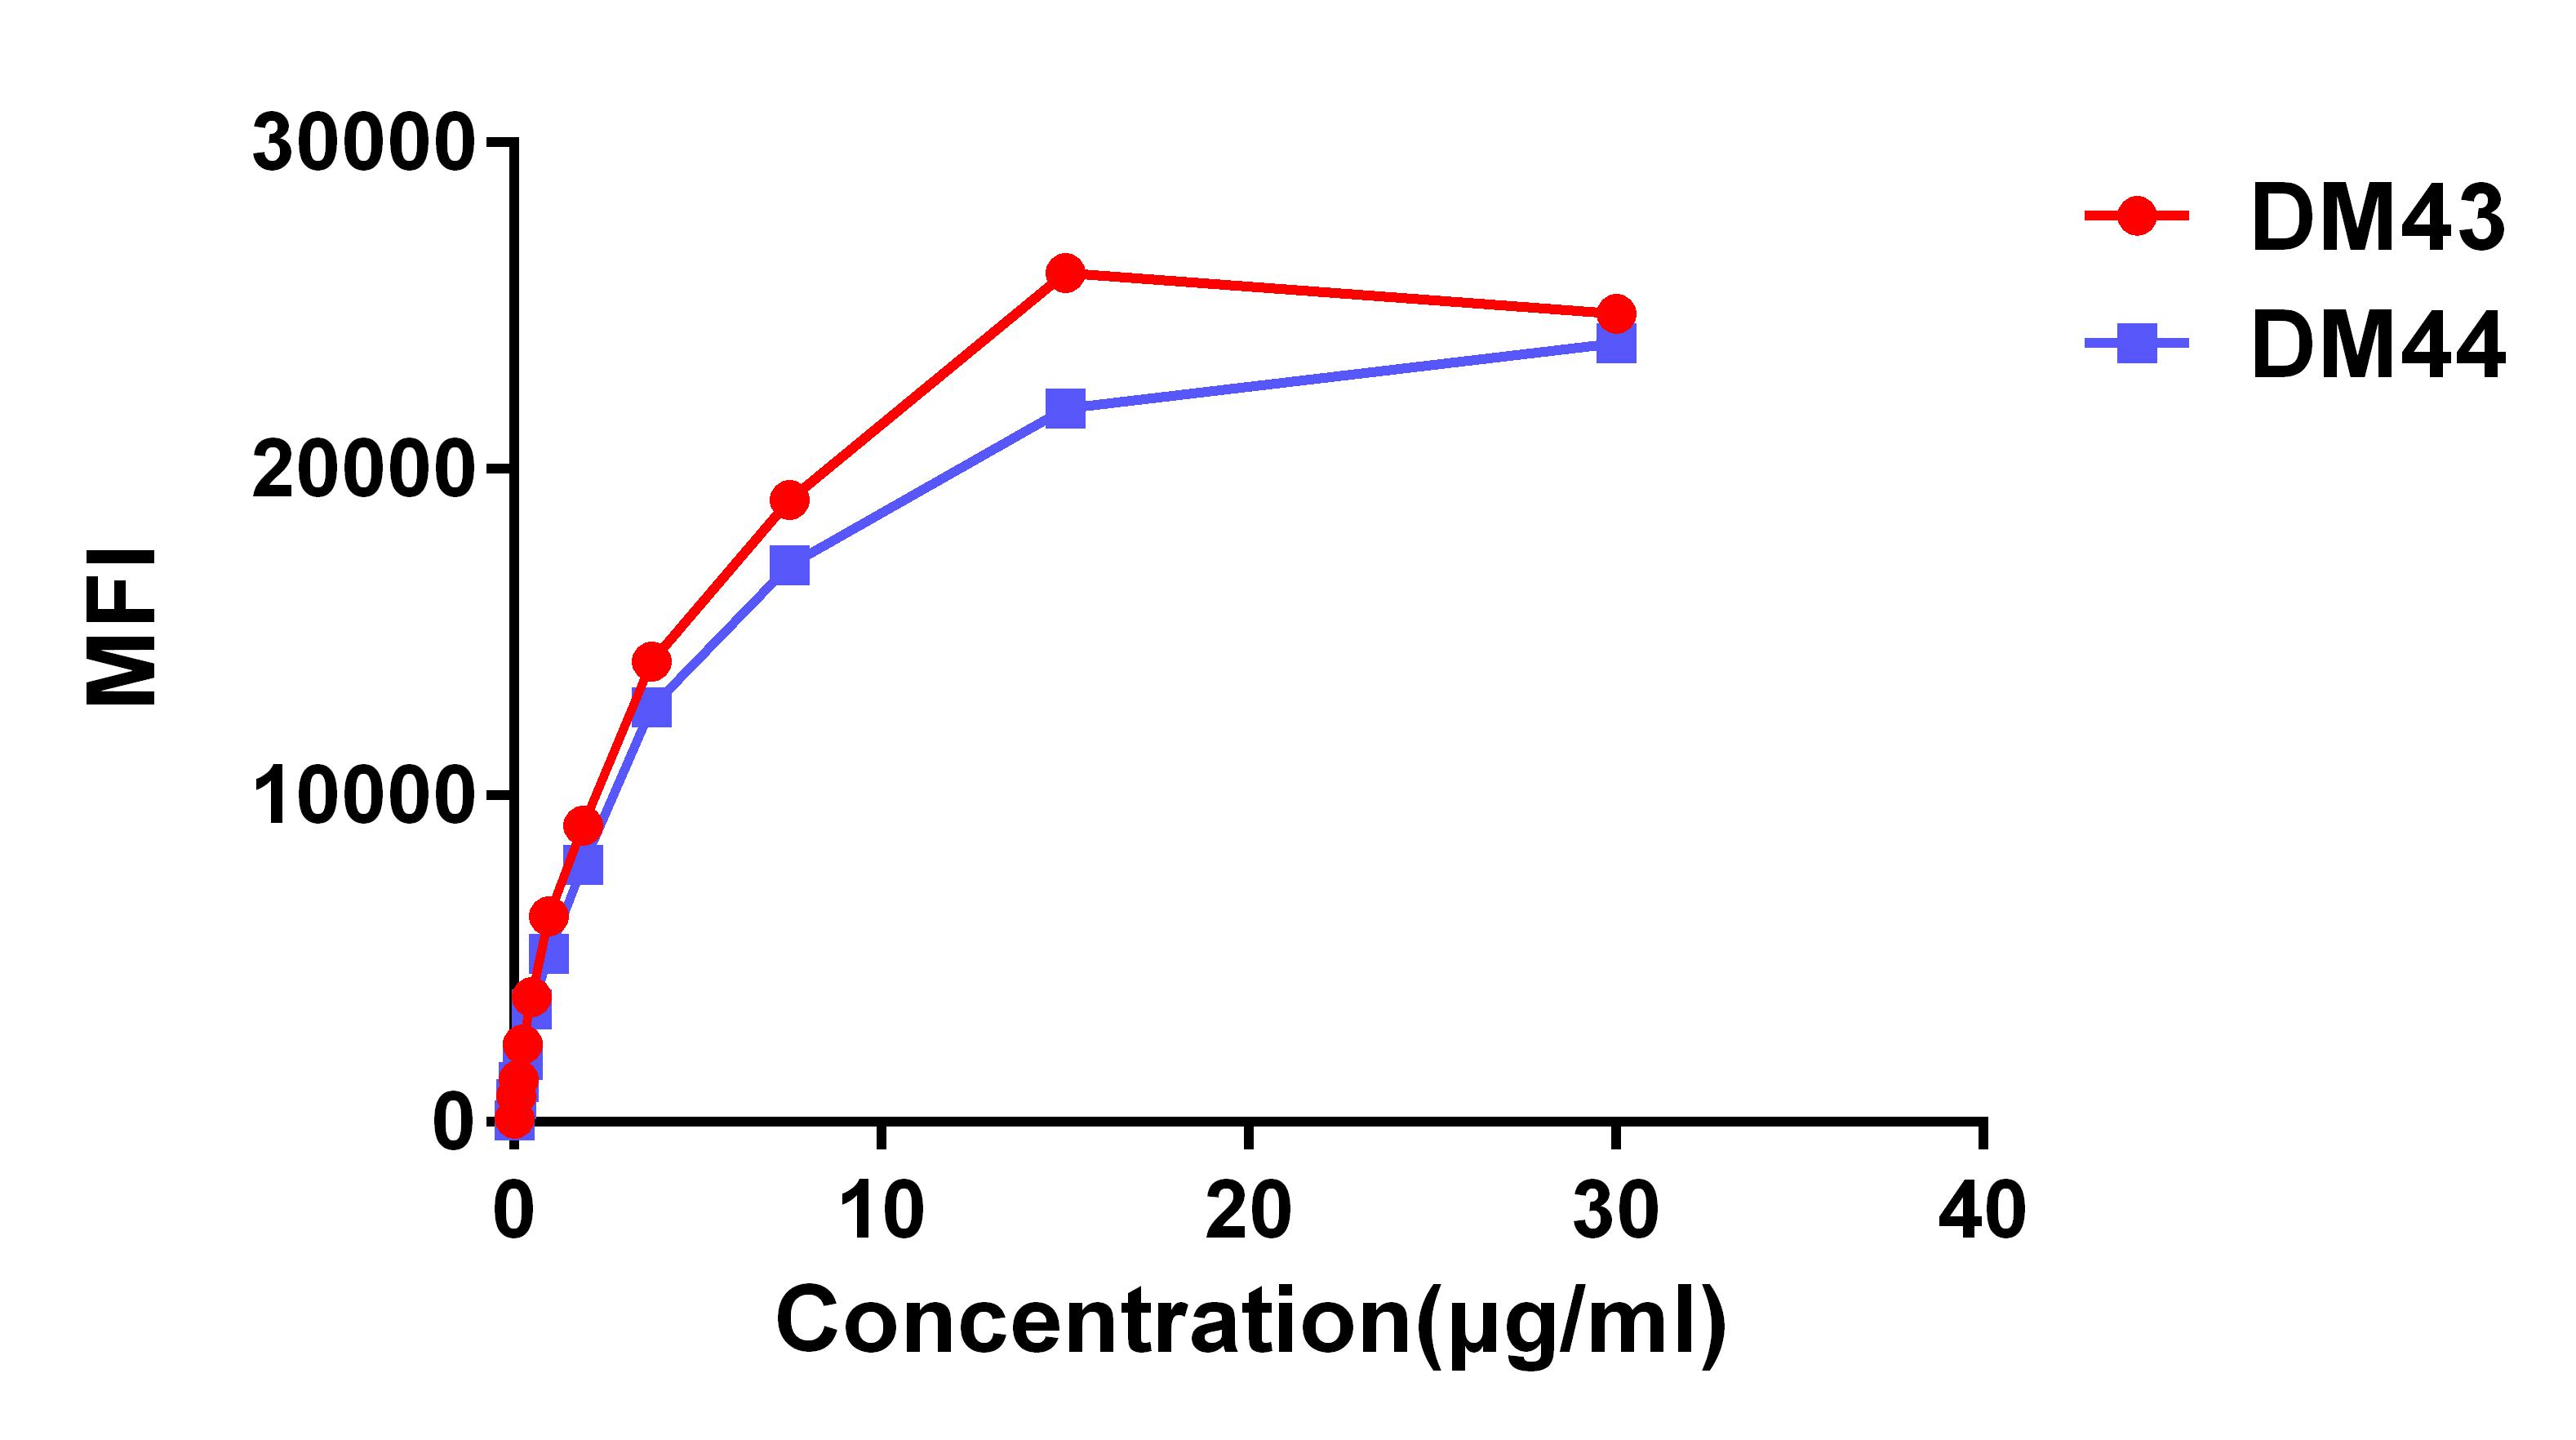 Figure 3. Affinity ranking of different Rabbit anti-CD48 mAb clones by titration of different concentration onto H929 cells. The Y-axis represents the mean fluorescence intensity (MFI) while the X-axis represents the concentration of IgG used.